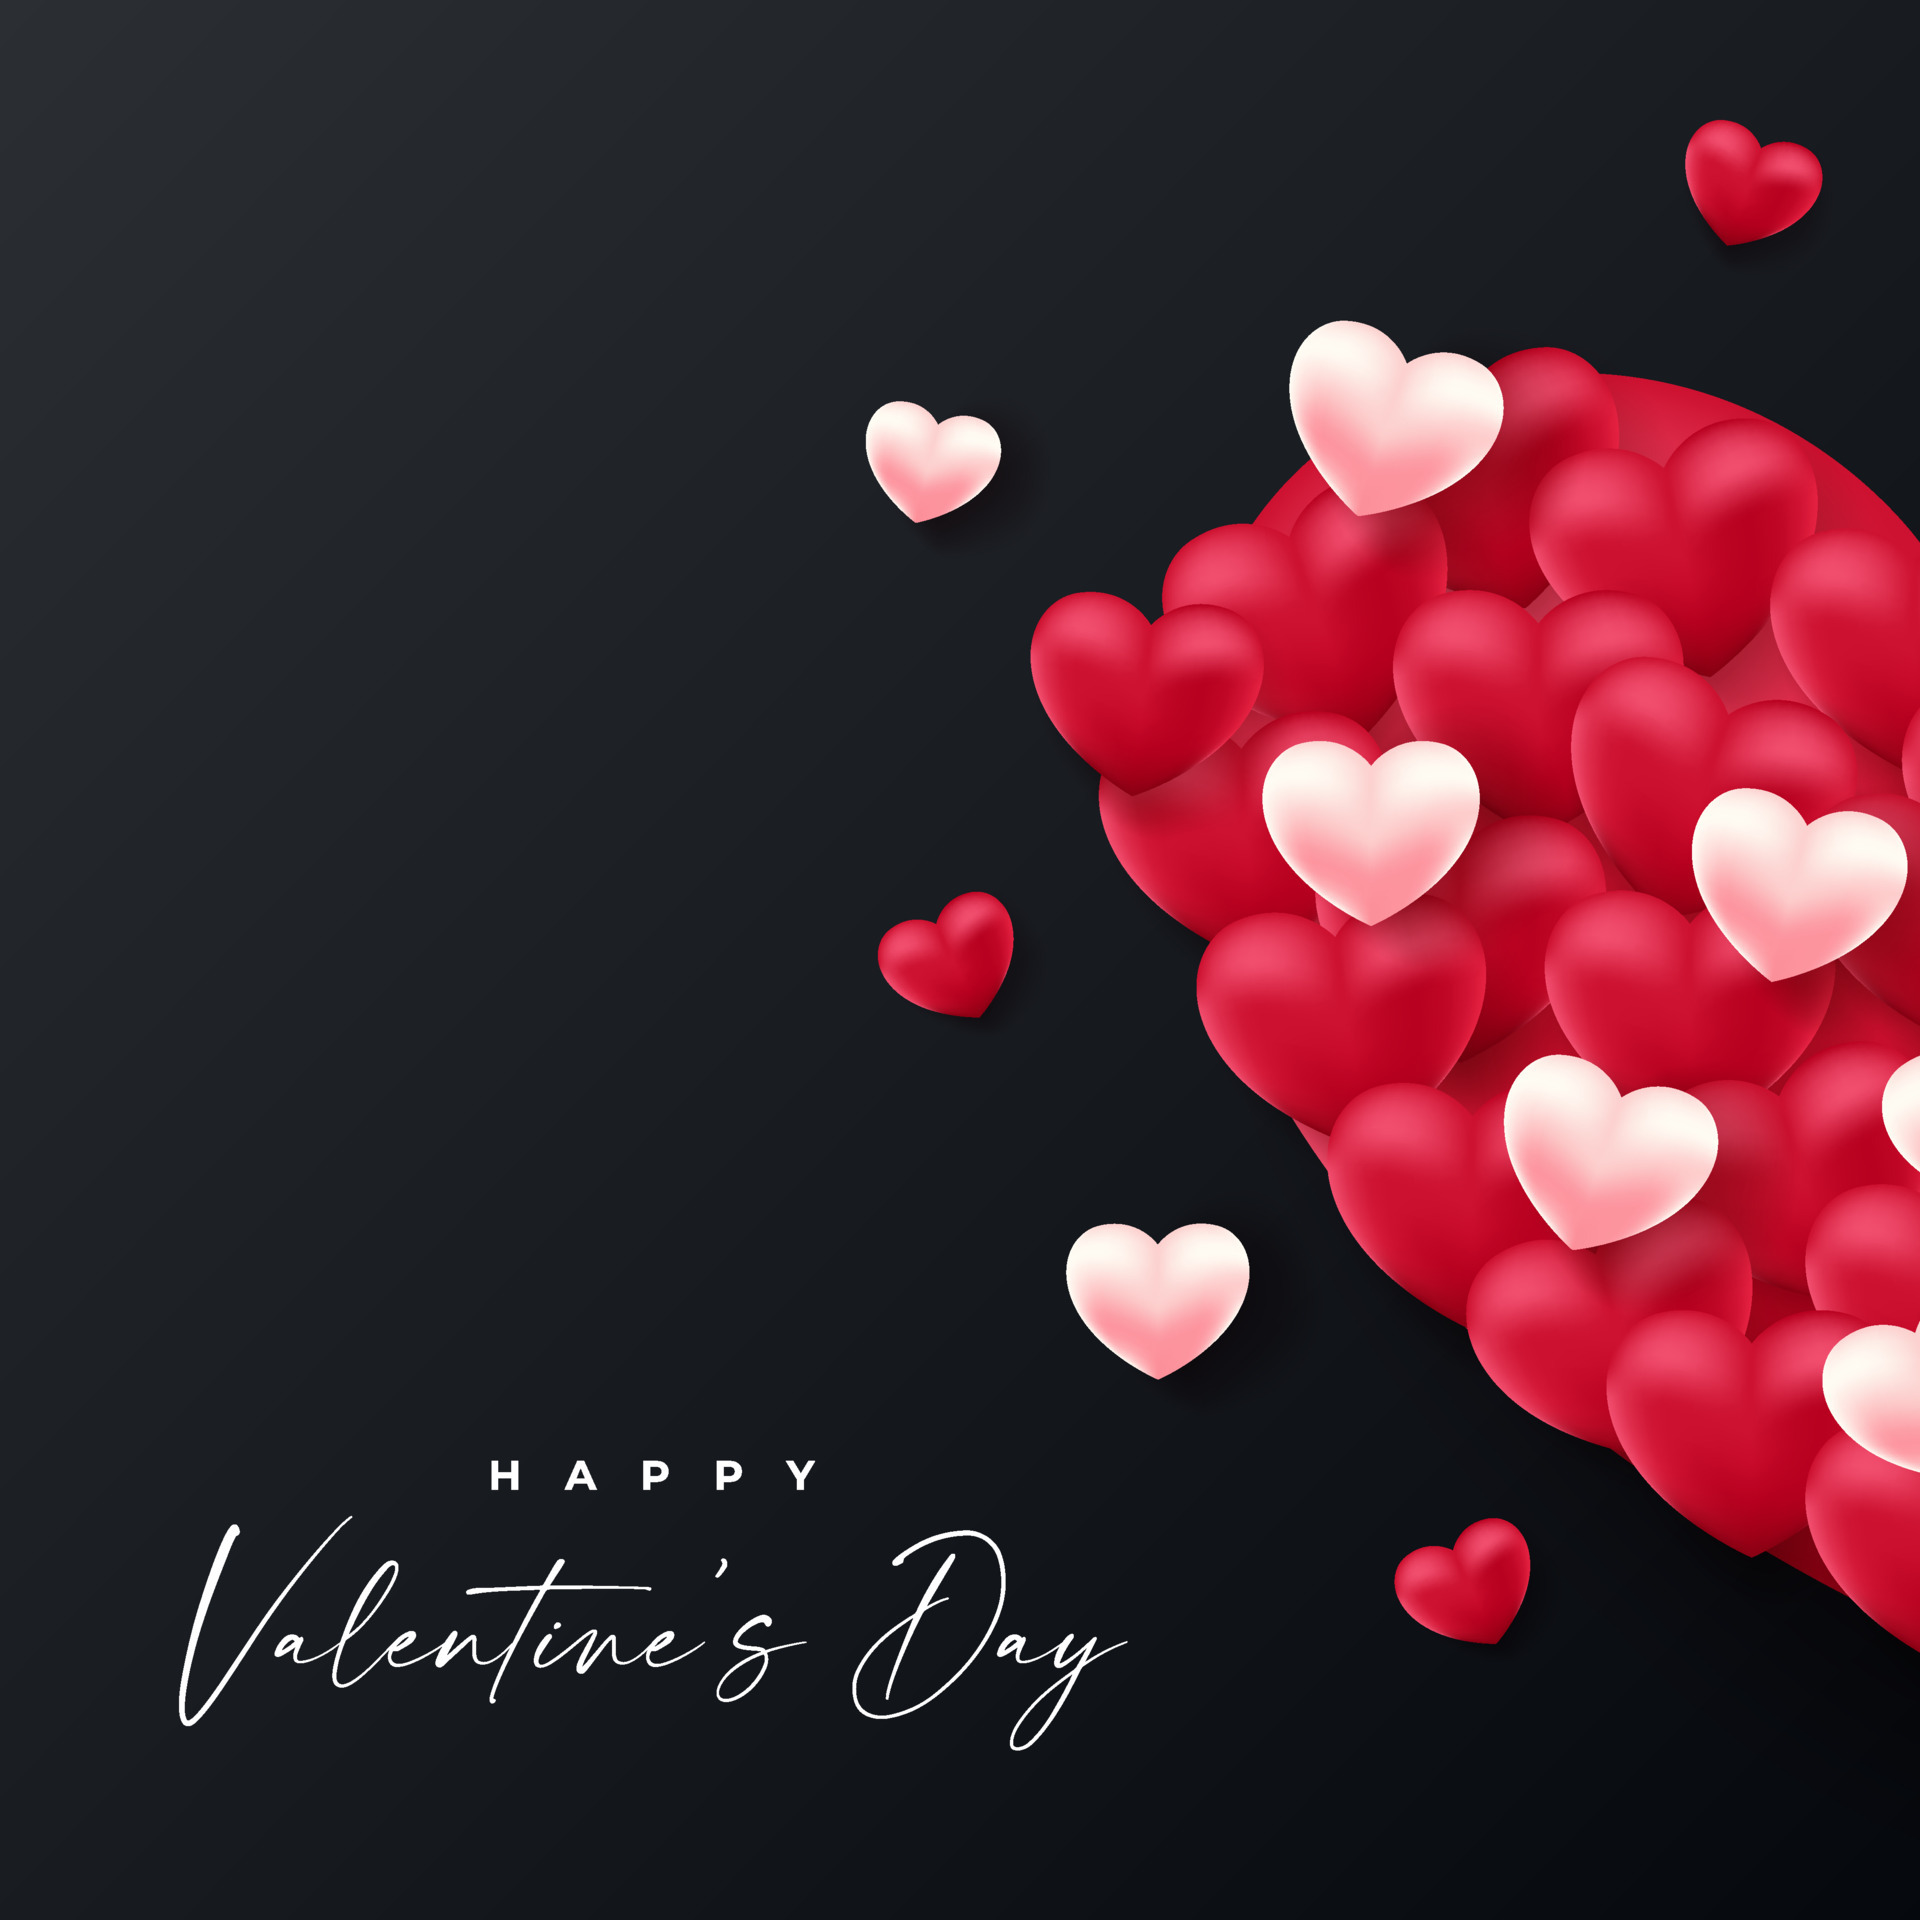 animated happy valentines day wallpaper